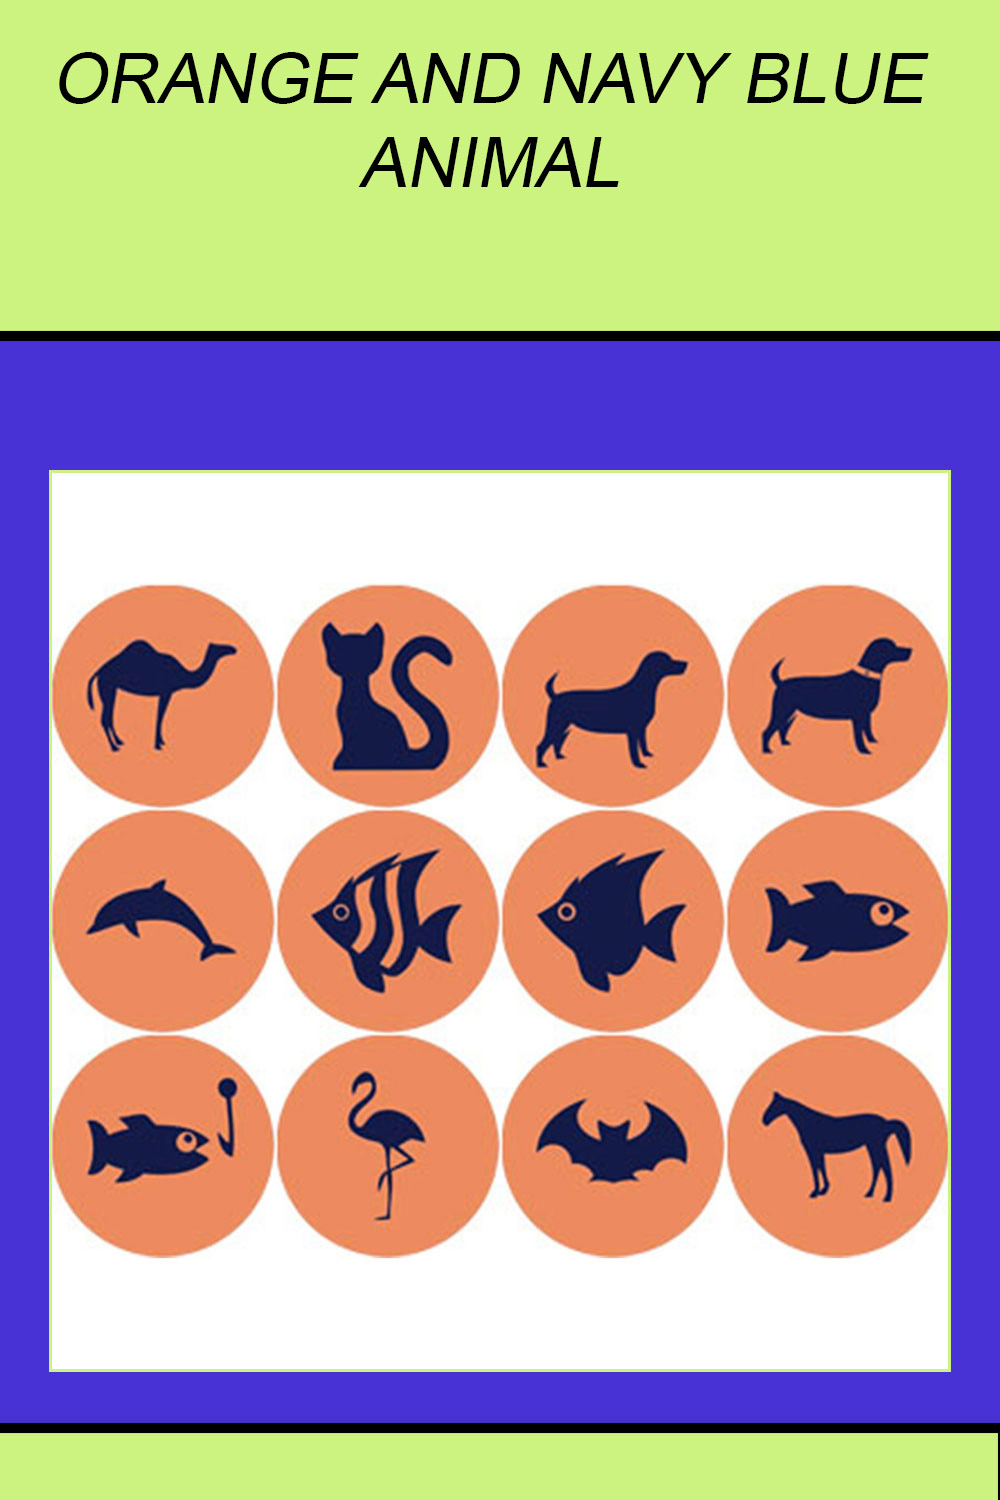 ORANGE AND NAVY BLUE ANIMAL ROUND ICONS pinterest preview image.